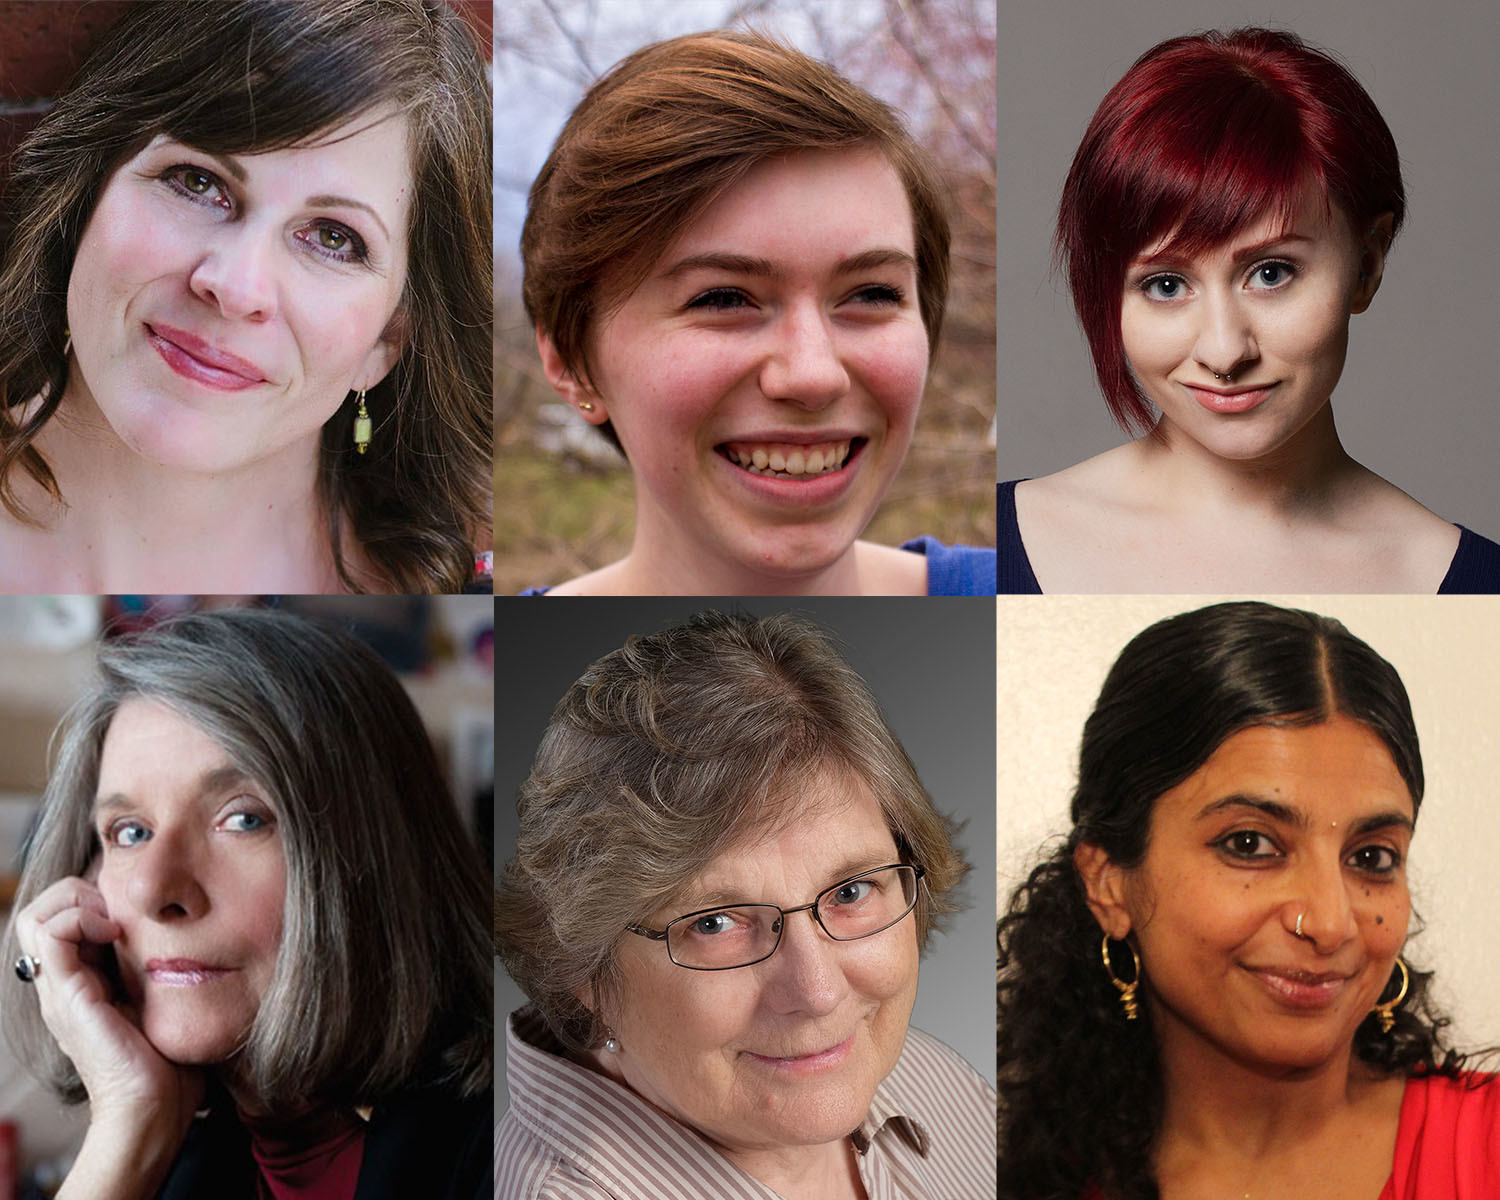 A collage photo of all our playwrights! Featuring Callie Kimball, Eileen Campbell, Caity-Shea Violette, Janet Burroway, Kristen Ebsen and Riti Sachdeva. 1